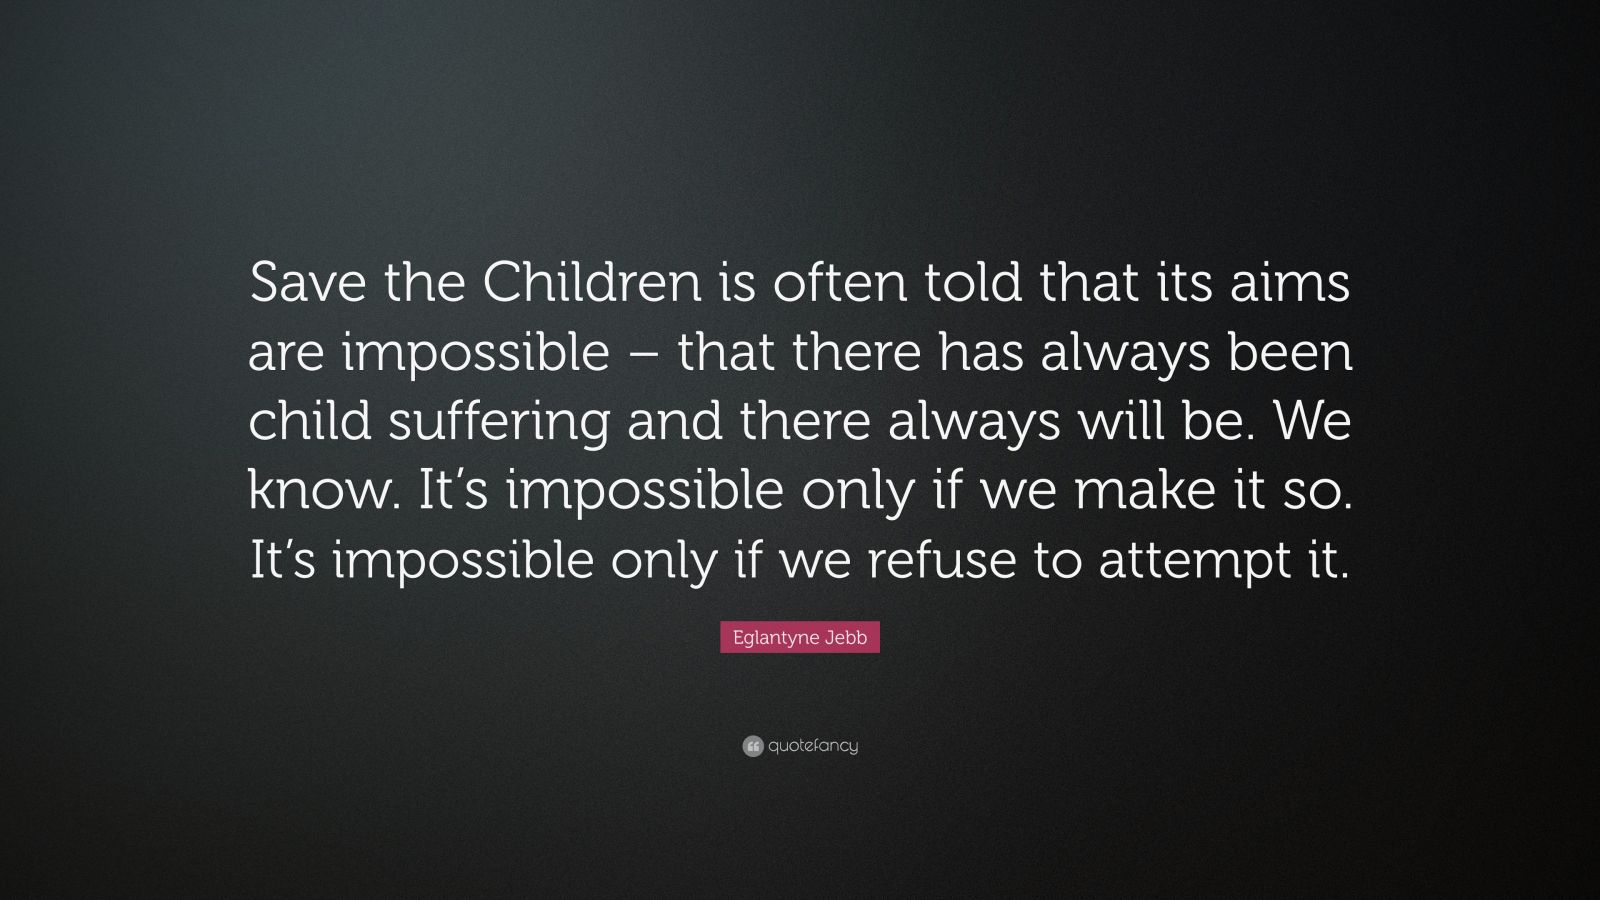 Eglantyne Jebb Quote: “Save the Children is often told that its aims ...